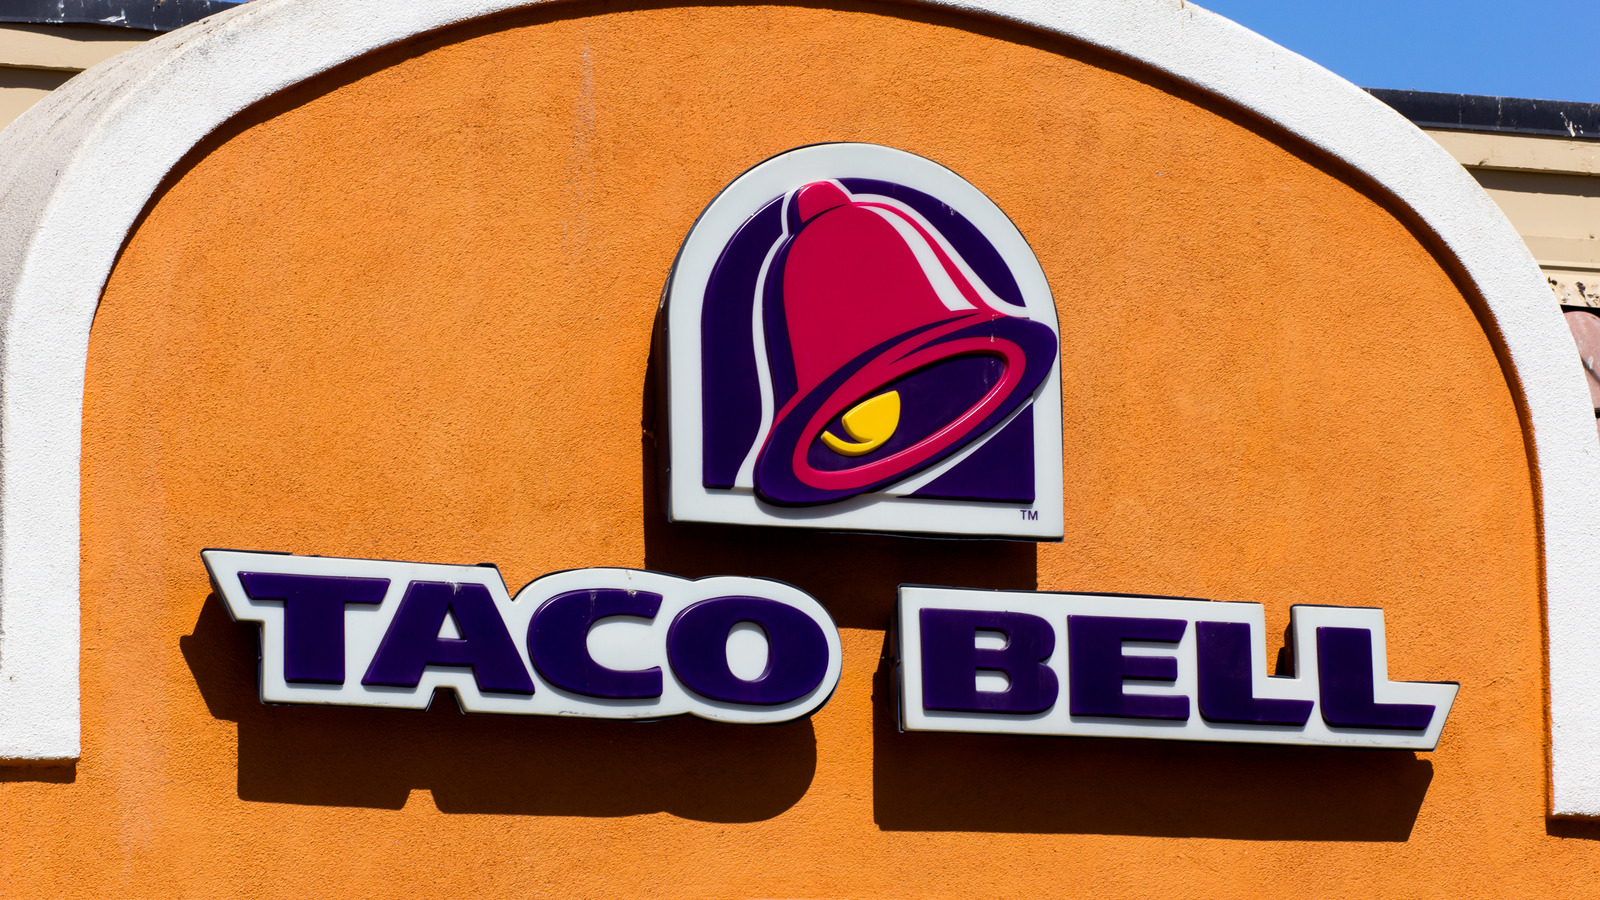 11 Vegan Options Available At Taco Bell